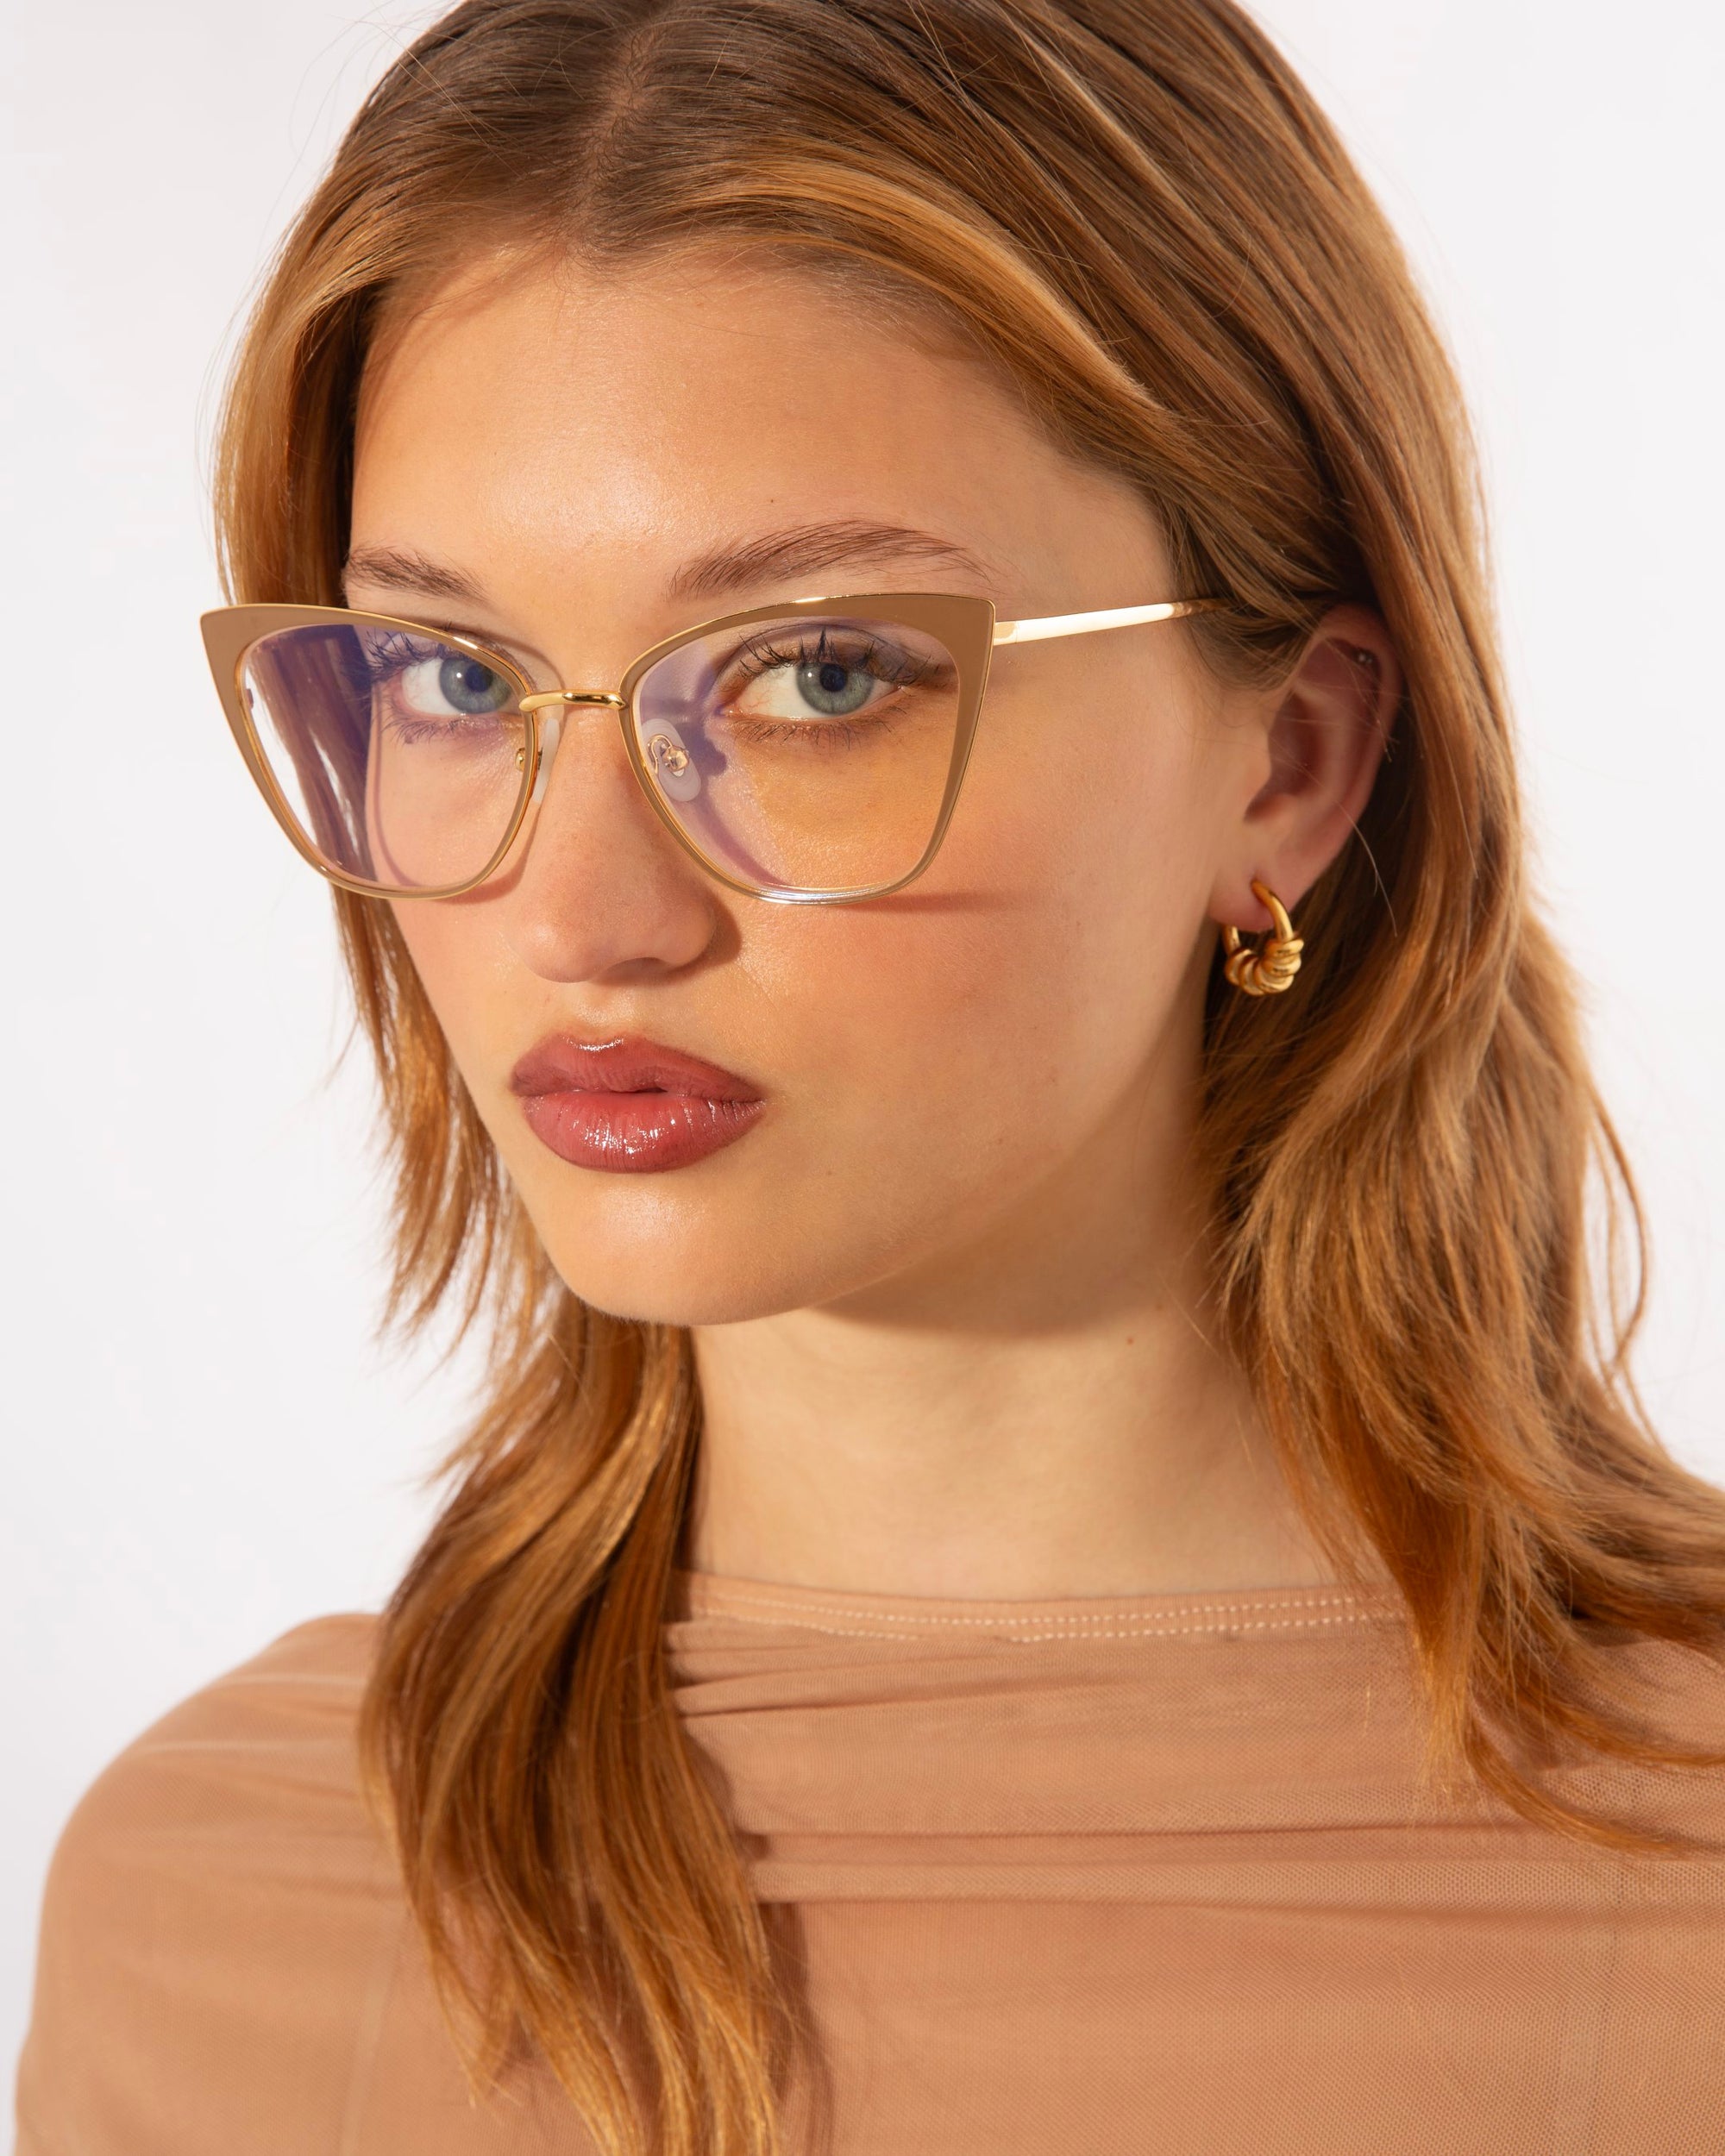 A young woman with light brown hair and wearing glasses looks directly at the camera. Her *Stella Two* glasses by *For Art&#39;s Sake®*, adorned with a golden frame and featuring blue light filter lenses, complement her small 14kt gold-plated hoop earrings. She is dressed in a sheer beige top, standing against a plain white background.